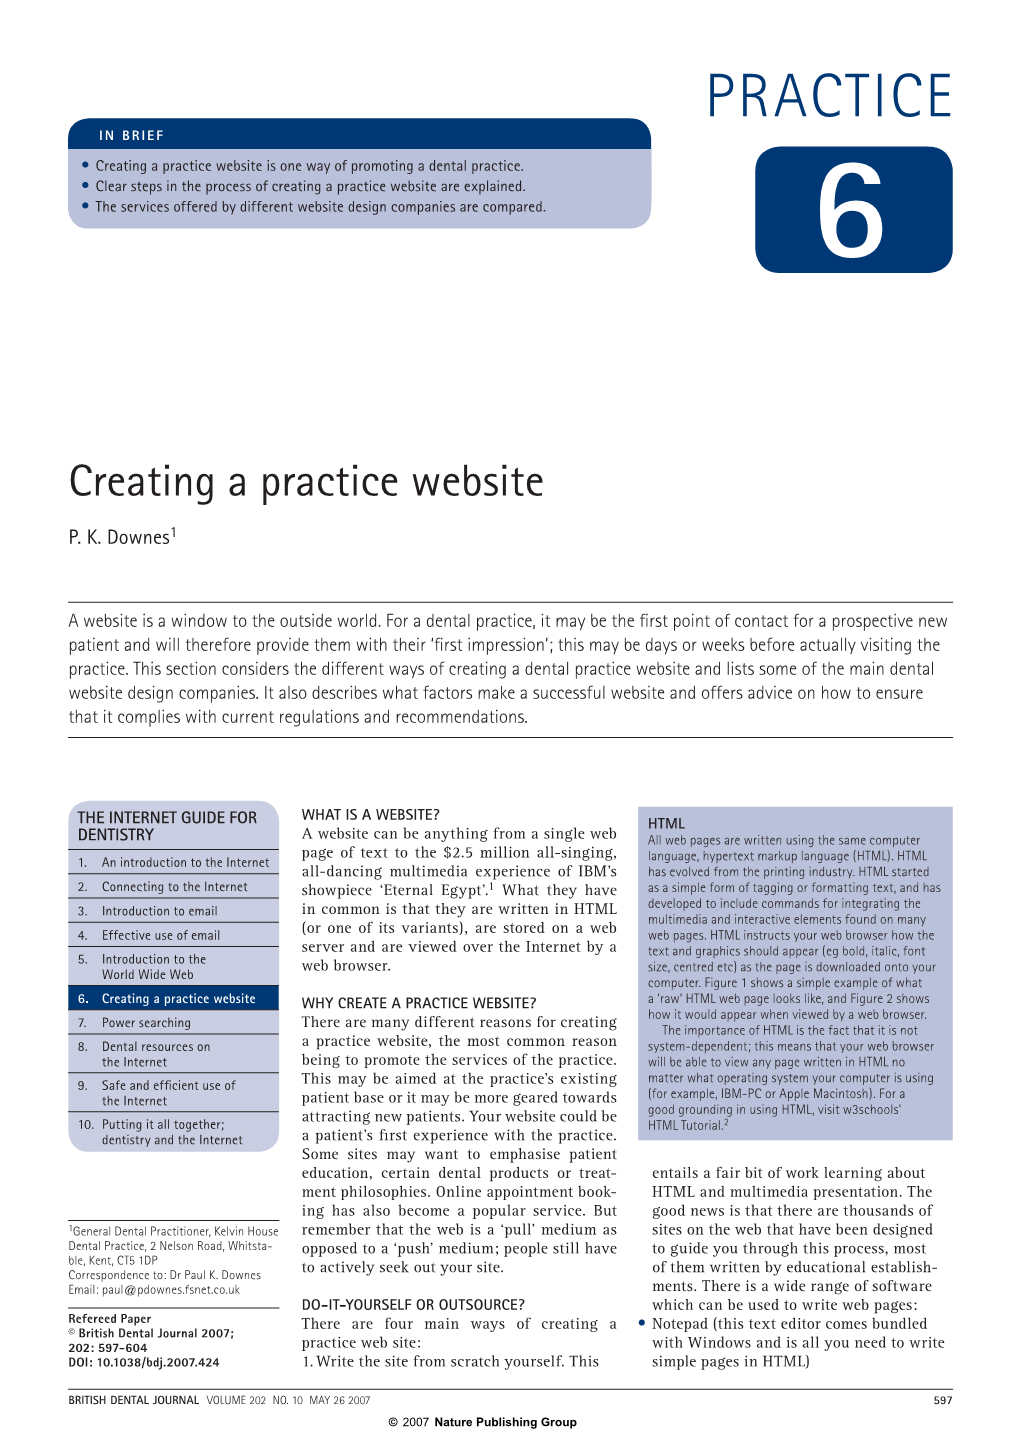 PRACTICE in BRIEF • Creating a Practice Website Is One Way of Promoting a Dental Practice